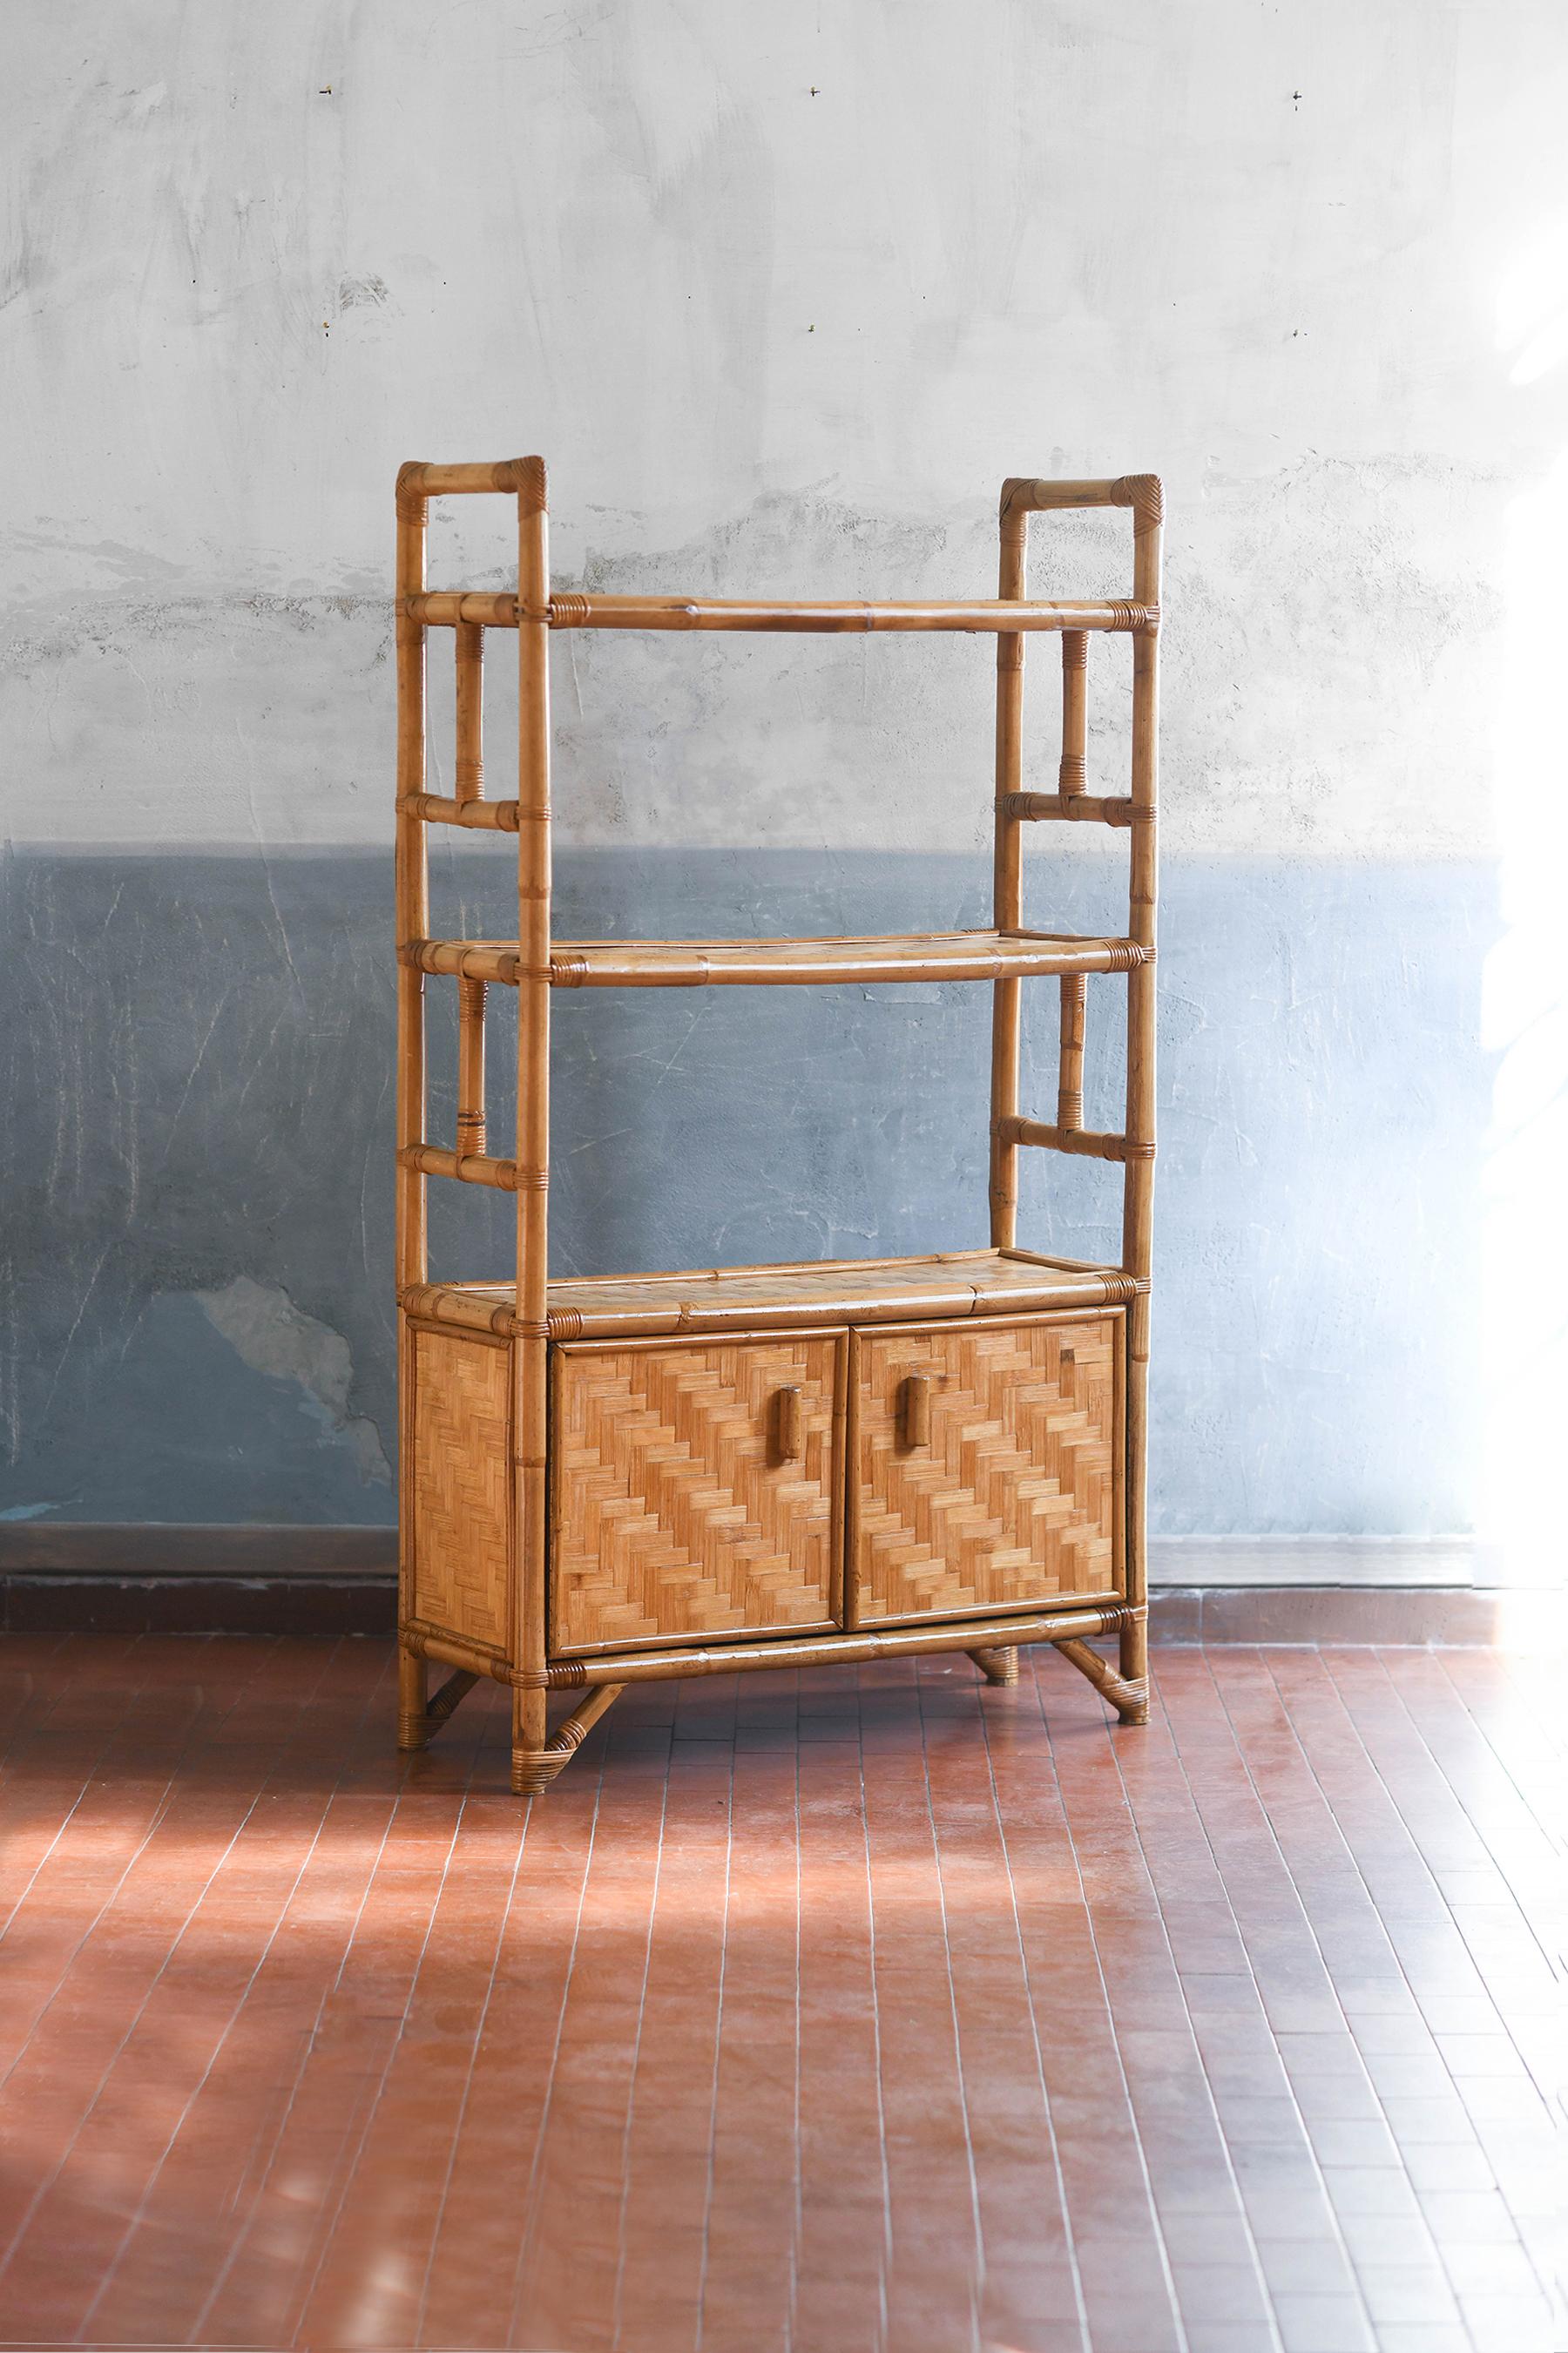 Bamboo and pressed bamboo sideboard 1980.
Storage unit with shelves and doors.
Dimensions 86 L x 150 H x 32 D cm